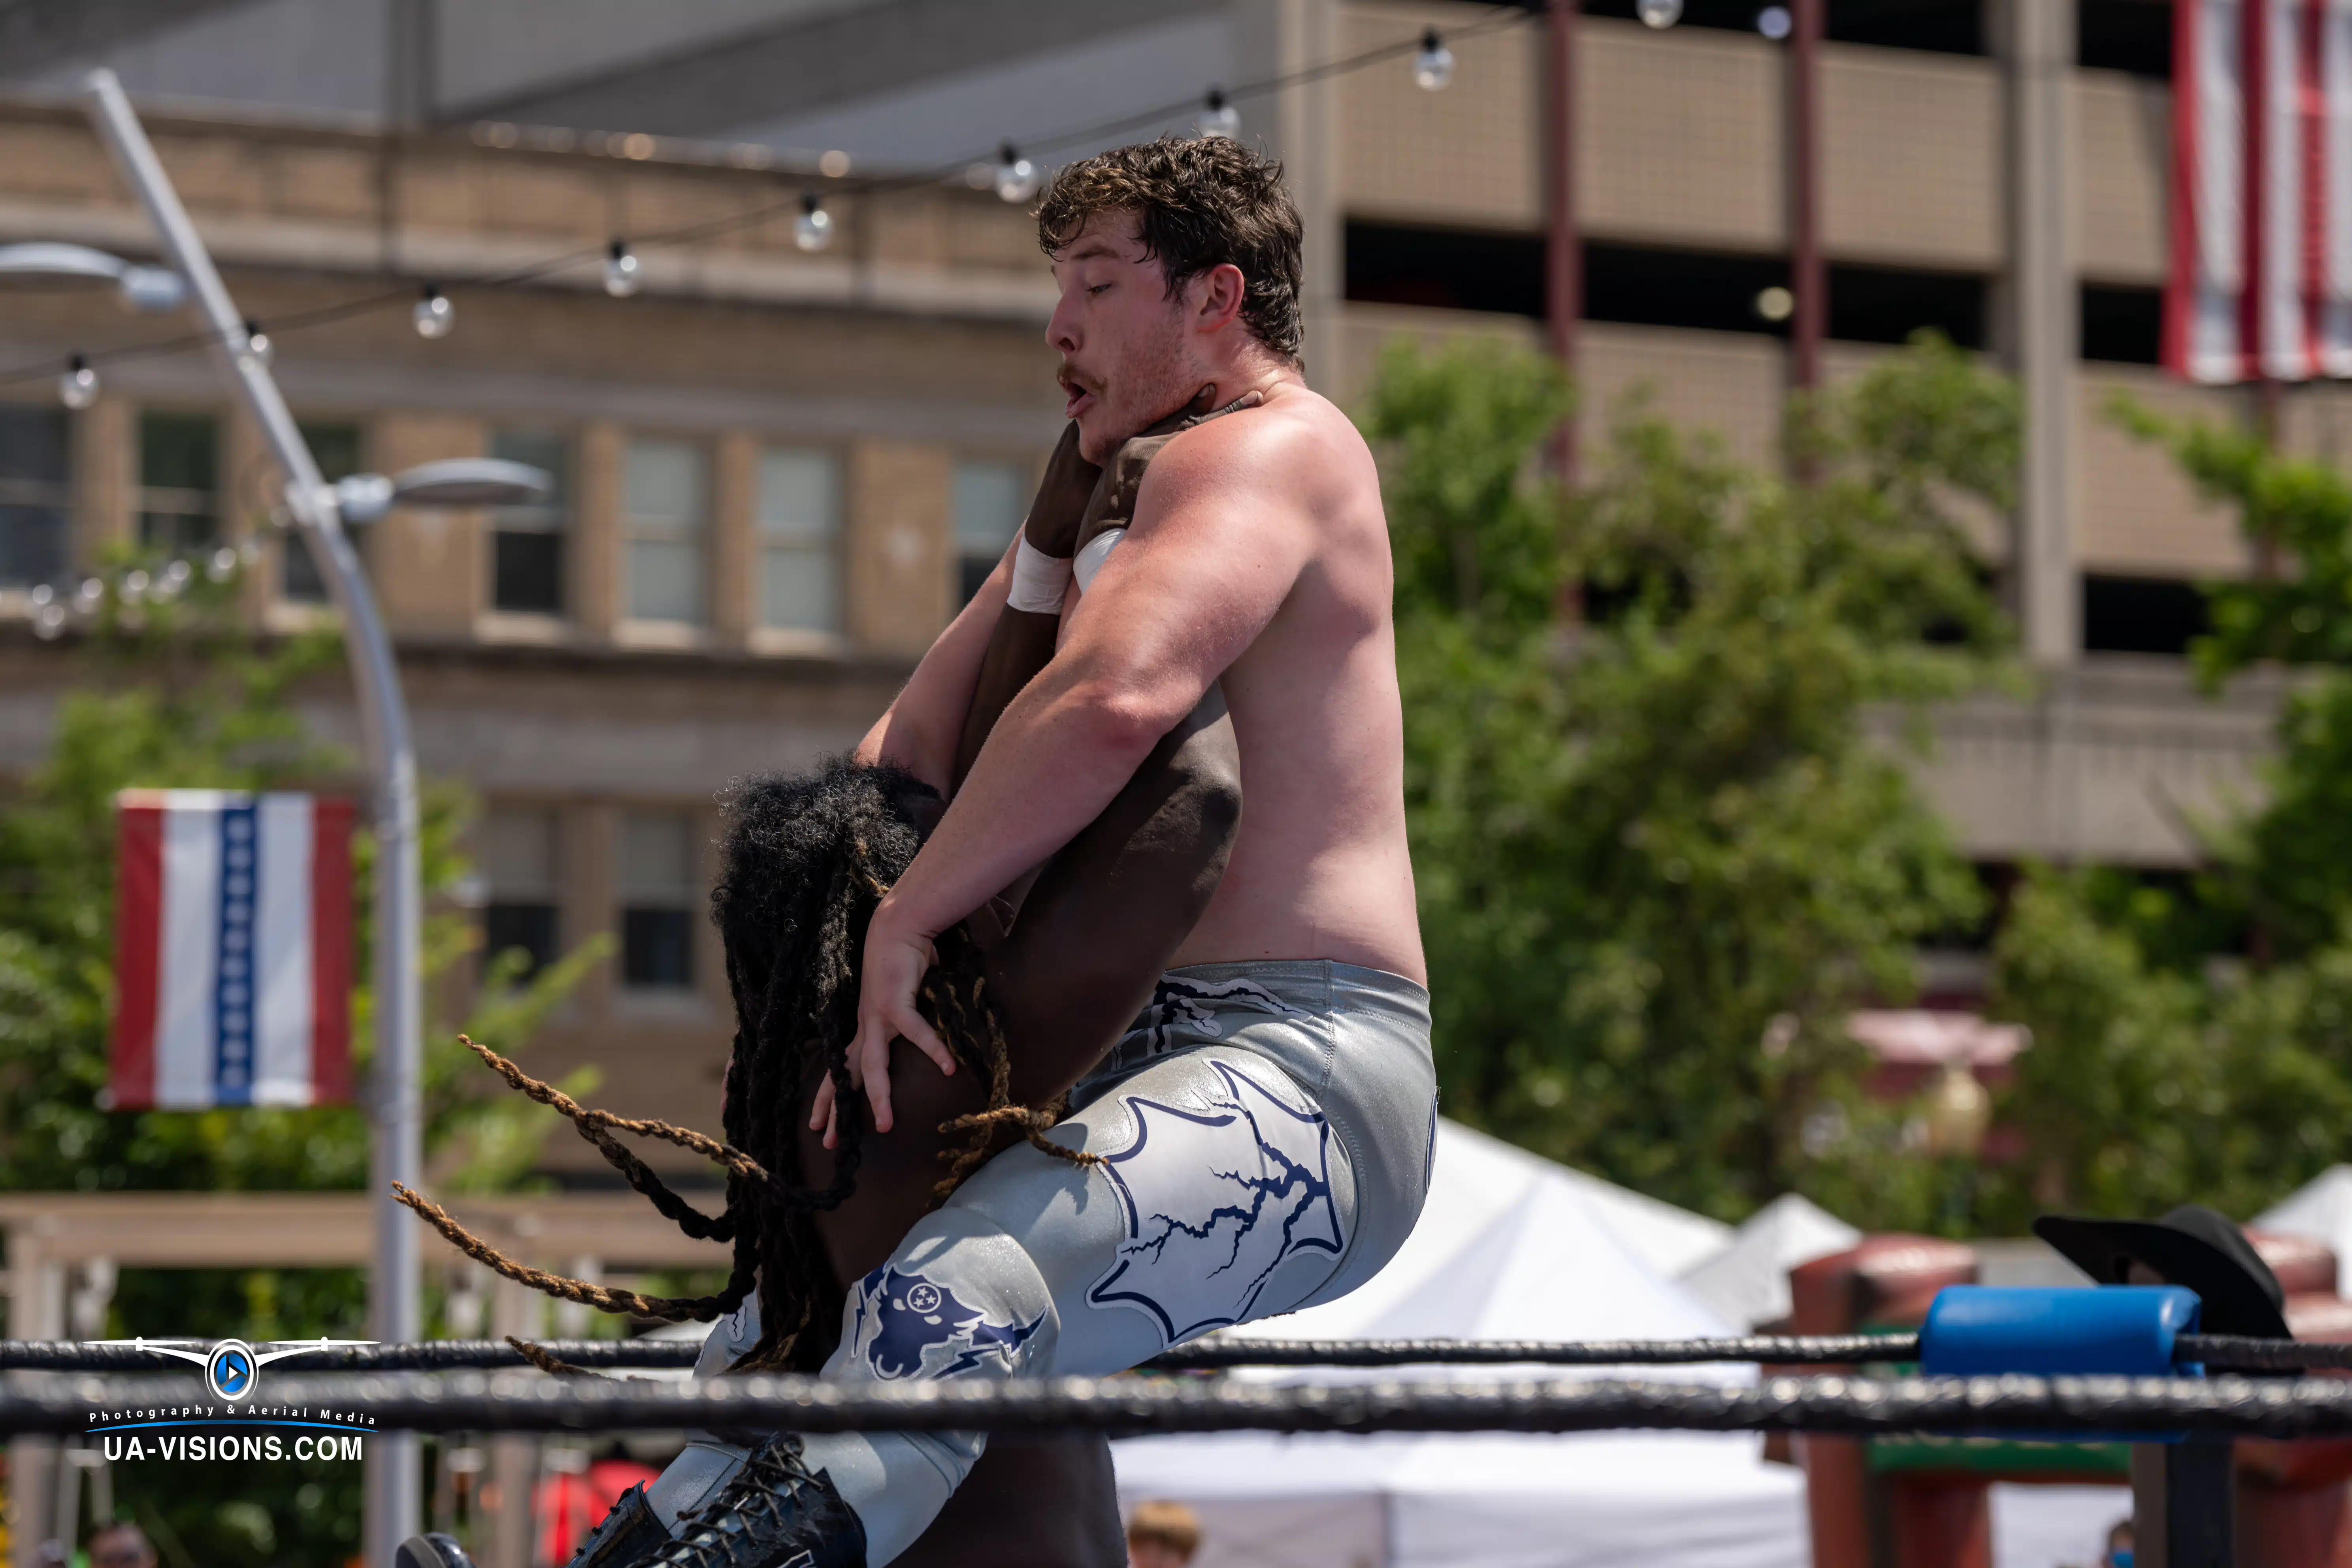 The Pro Wrestling Event at the 2024 Charleston Sternwheel Regatta taken by the UA-Visions Team